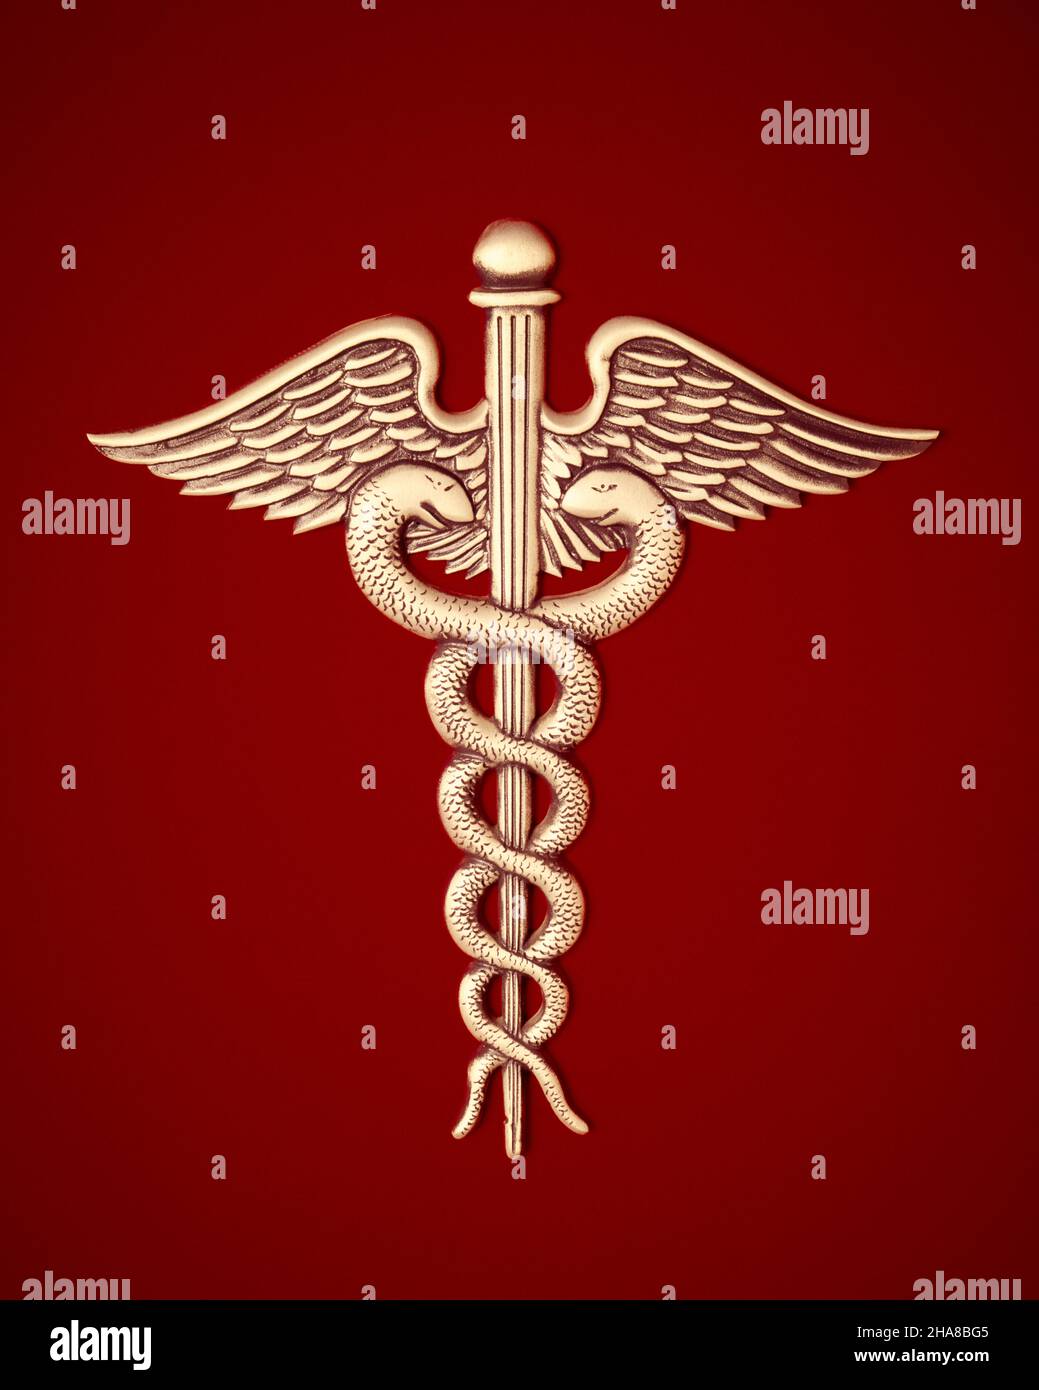 1990s CADUCEUS SILVER ON RED BACKGROUND THE AMERICAN SYMBOL OF ...